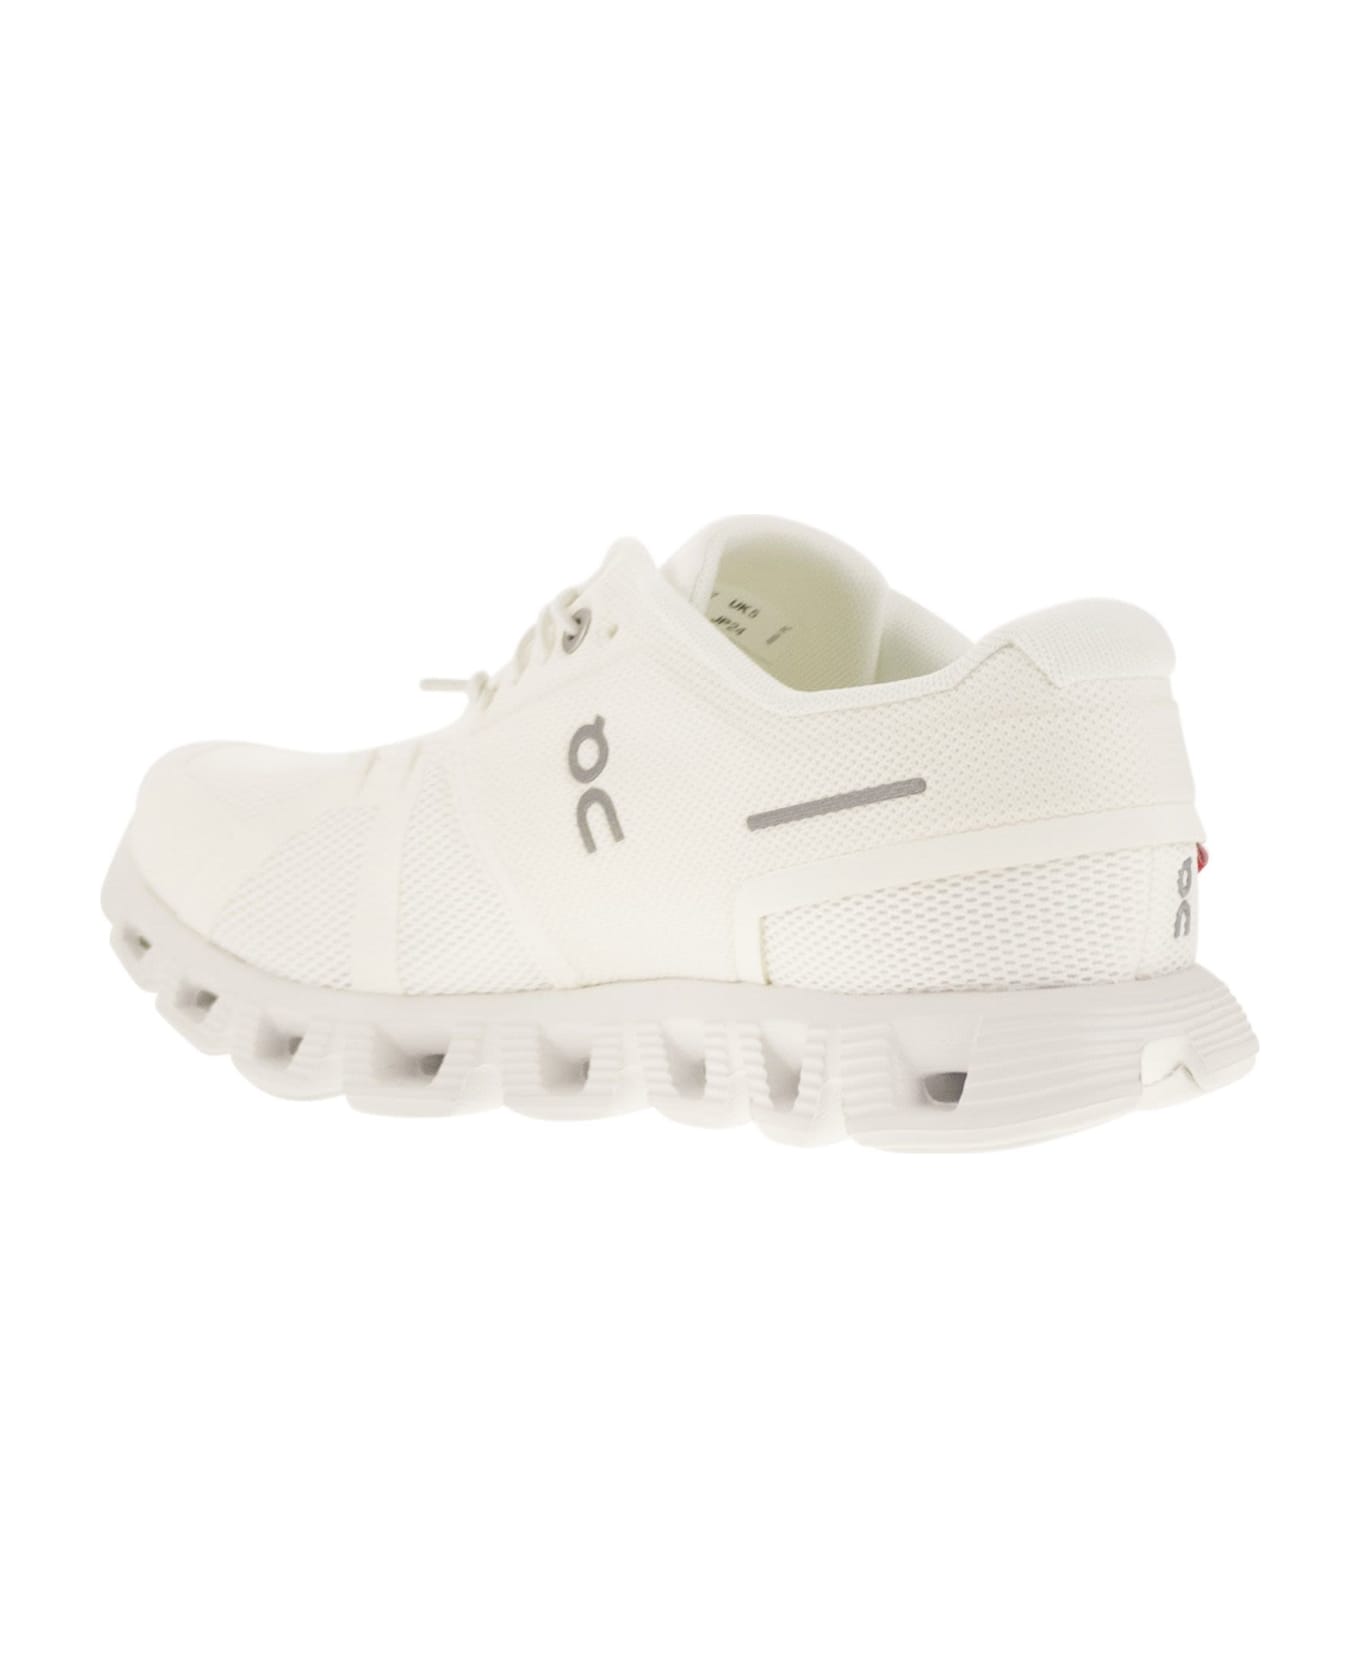 ON Cloud 5 - Sneakers - White スニーカー